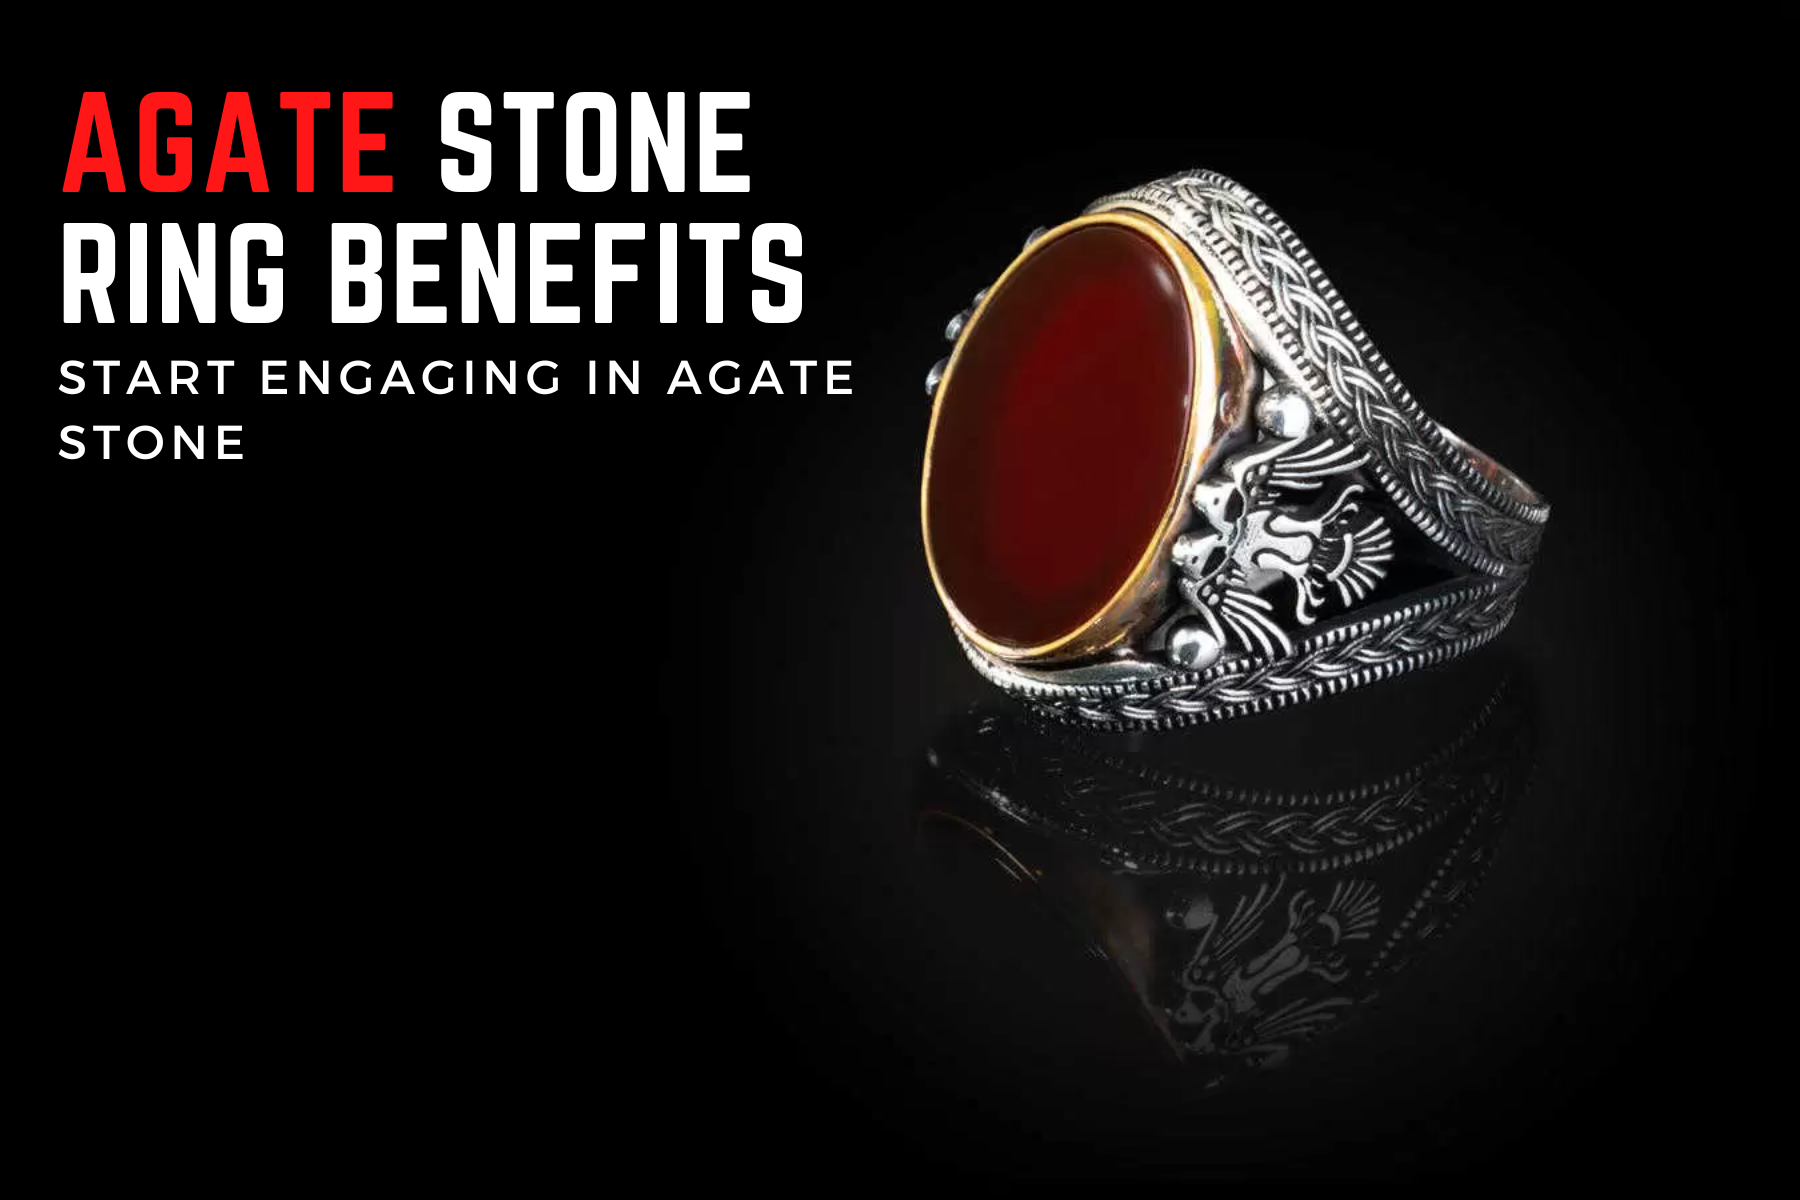 Agate Stone Ring Benefits - Start Engaging In Agate Stone